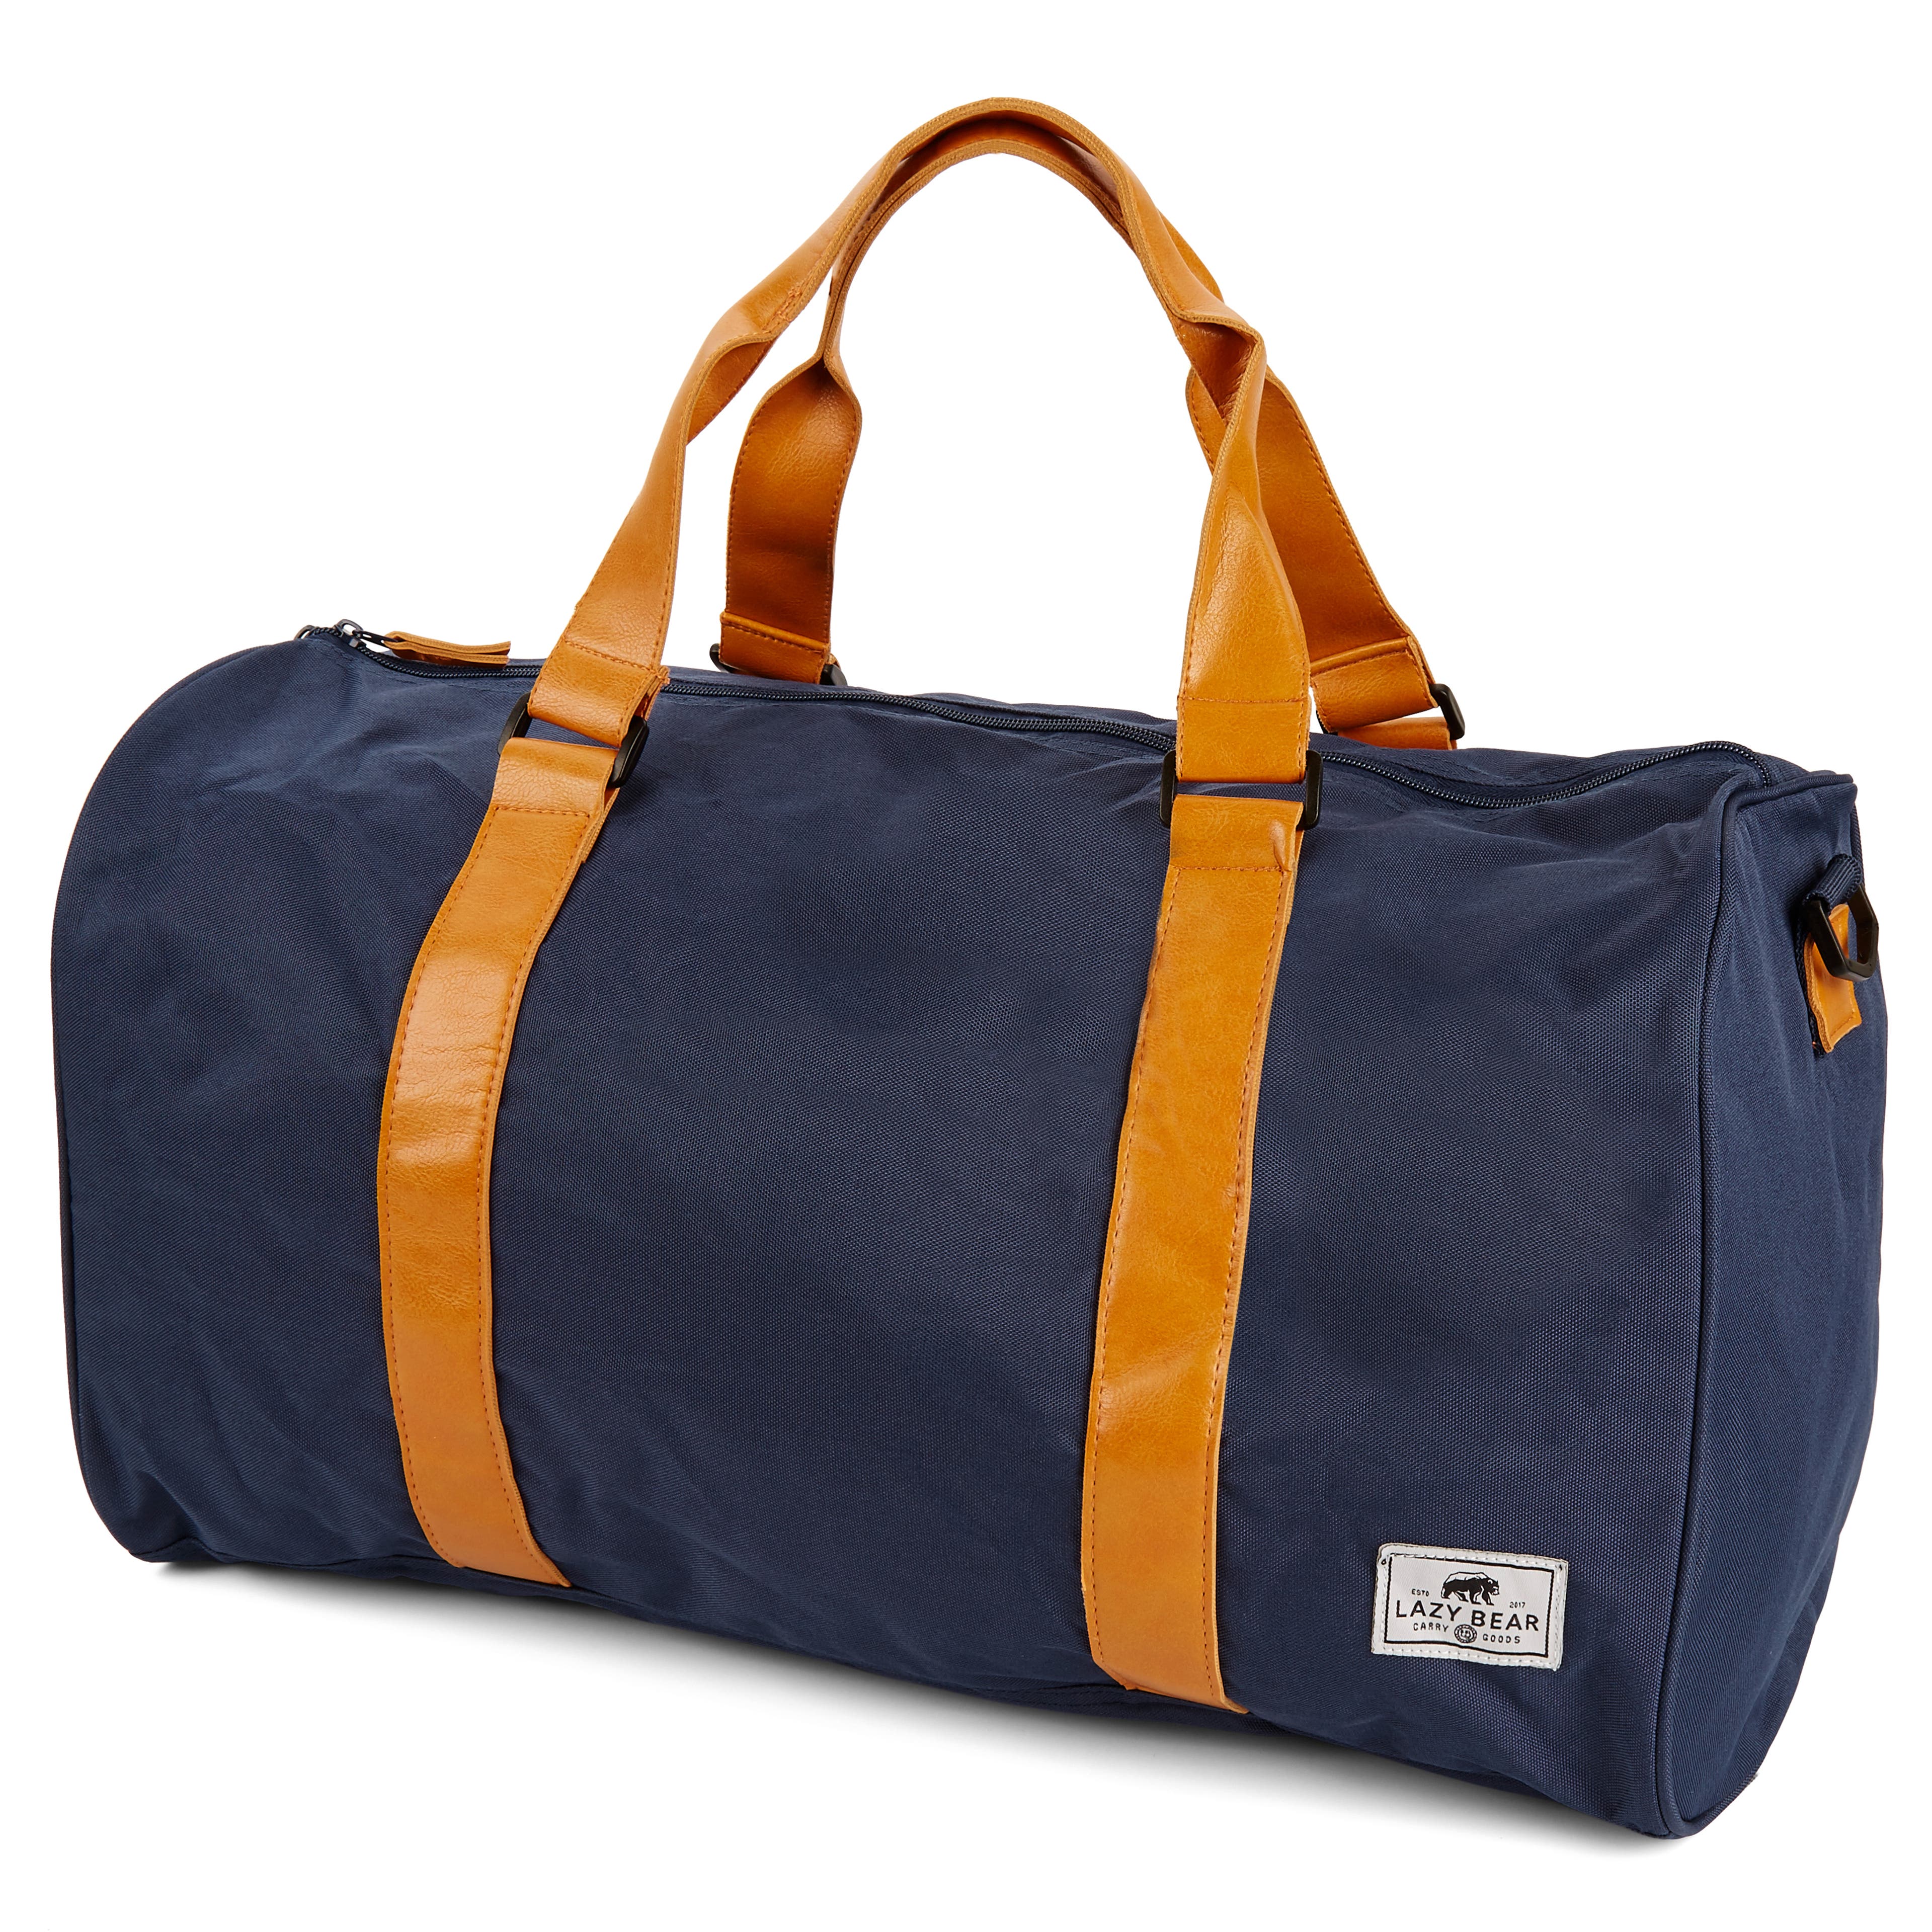 Lewis | Navy Blue Polyester & Tan Faux Leather Duffle Bag